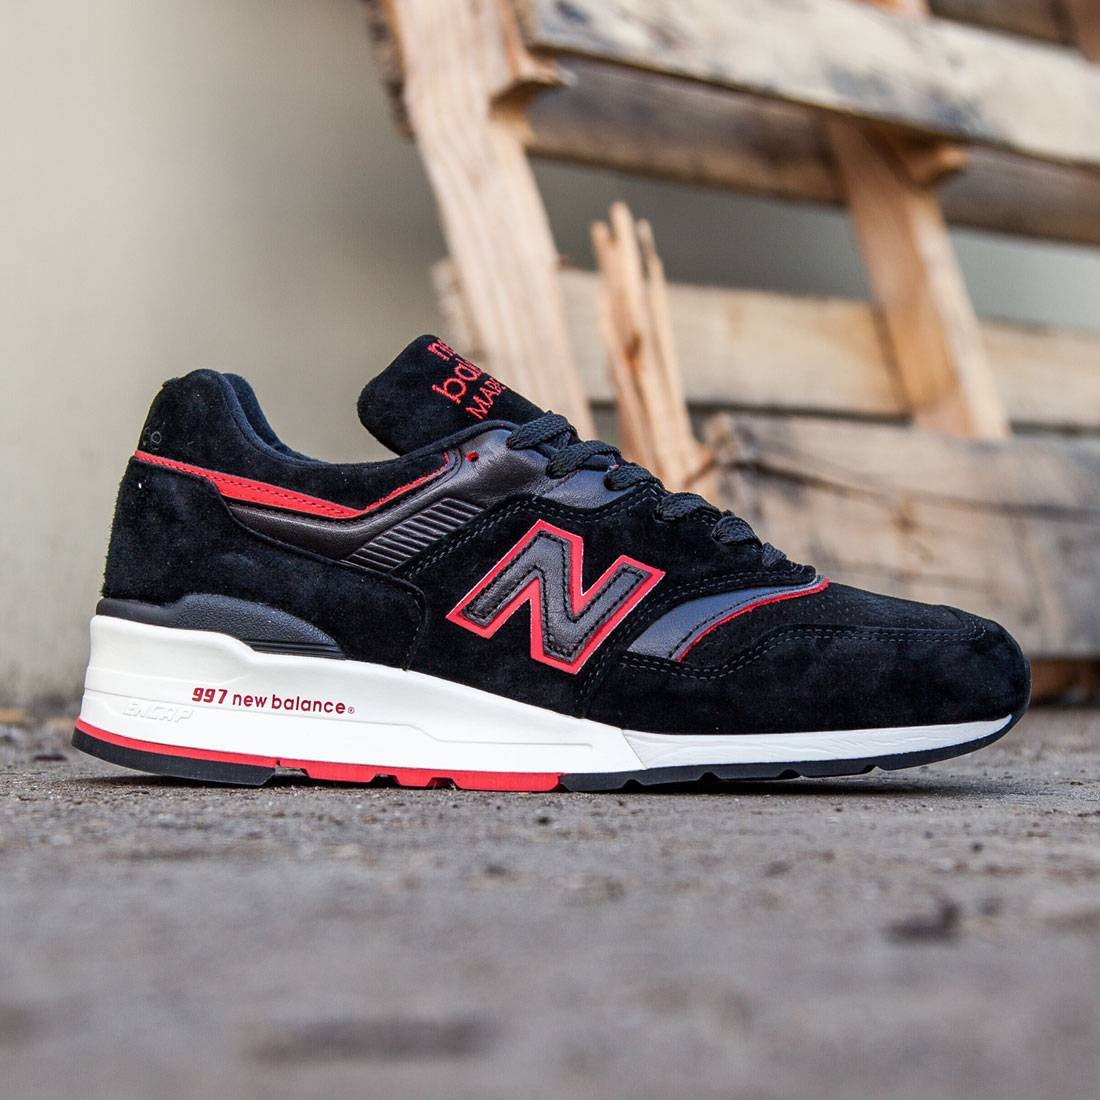 New Balance Men 997 Air Exploration M997Dexp - Made In Usa Black Red